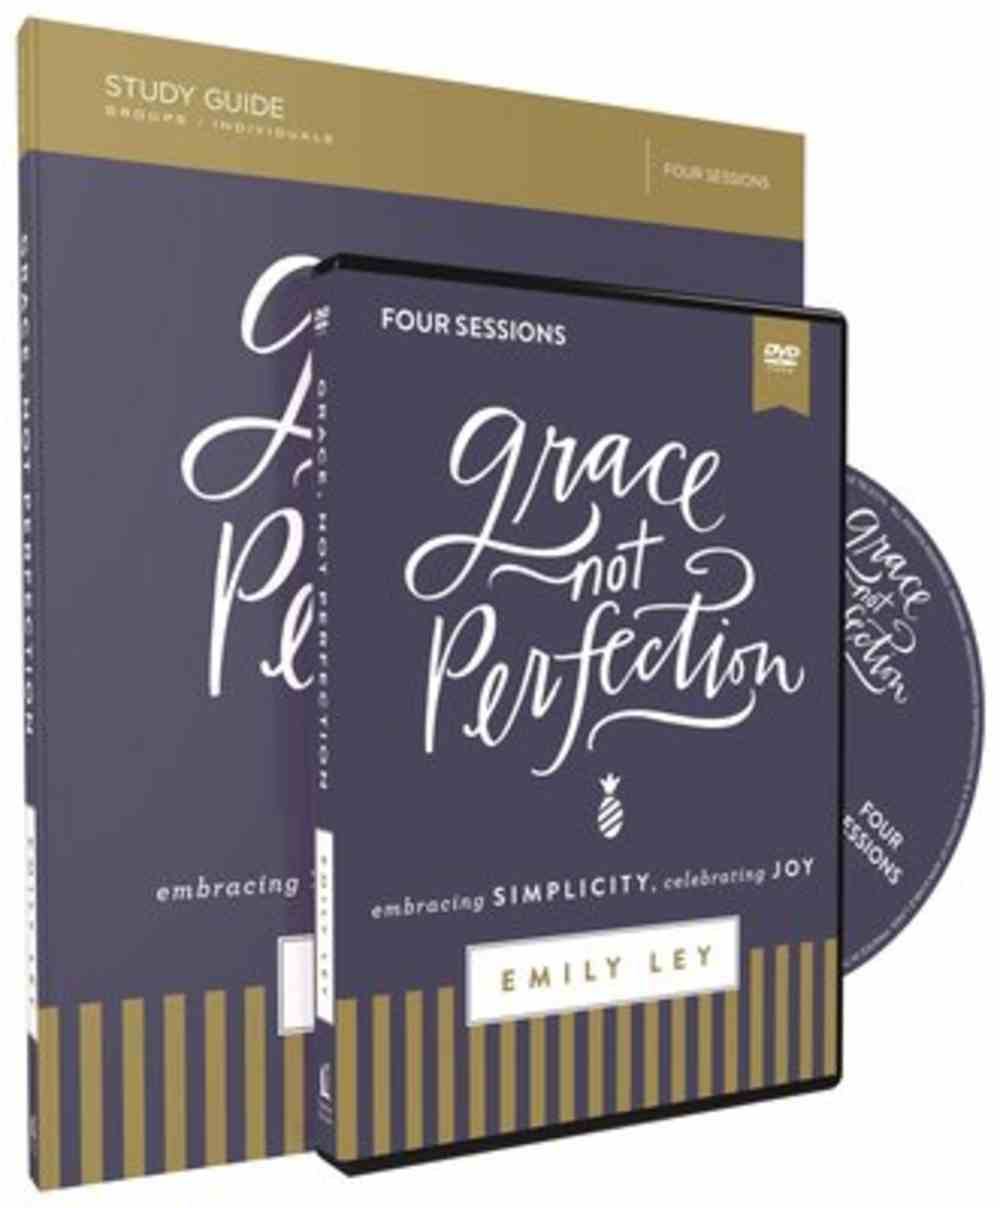 Grace, Not Perfection: Embracing Simplicity, Celebrating Joy (Study Guide & Dvd) Pack